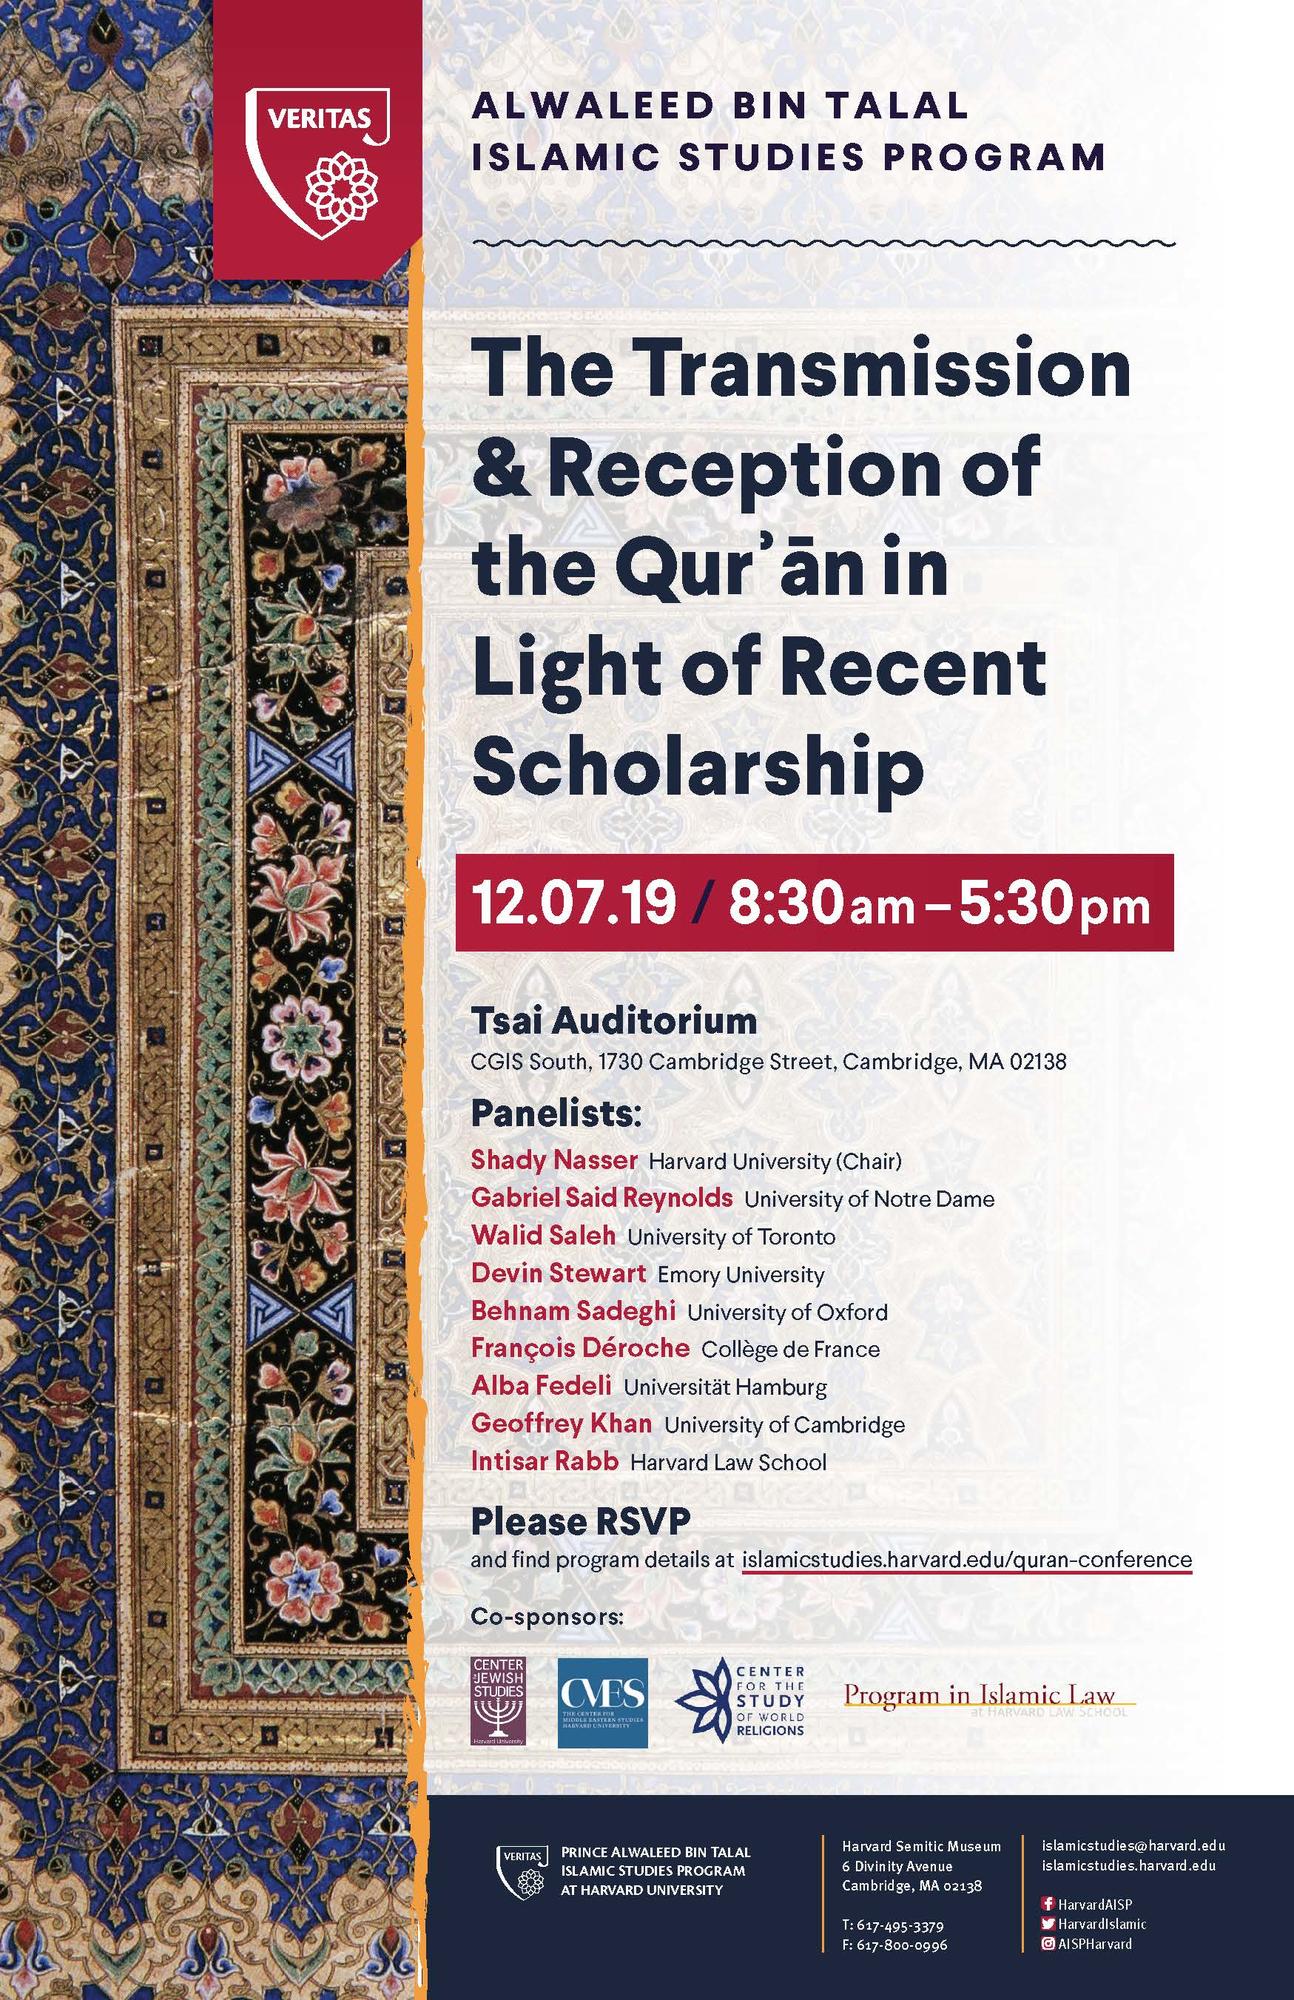 The Transmission and Reception of the Qur'an in Light of Recent Scholarship